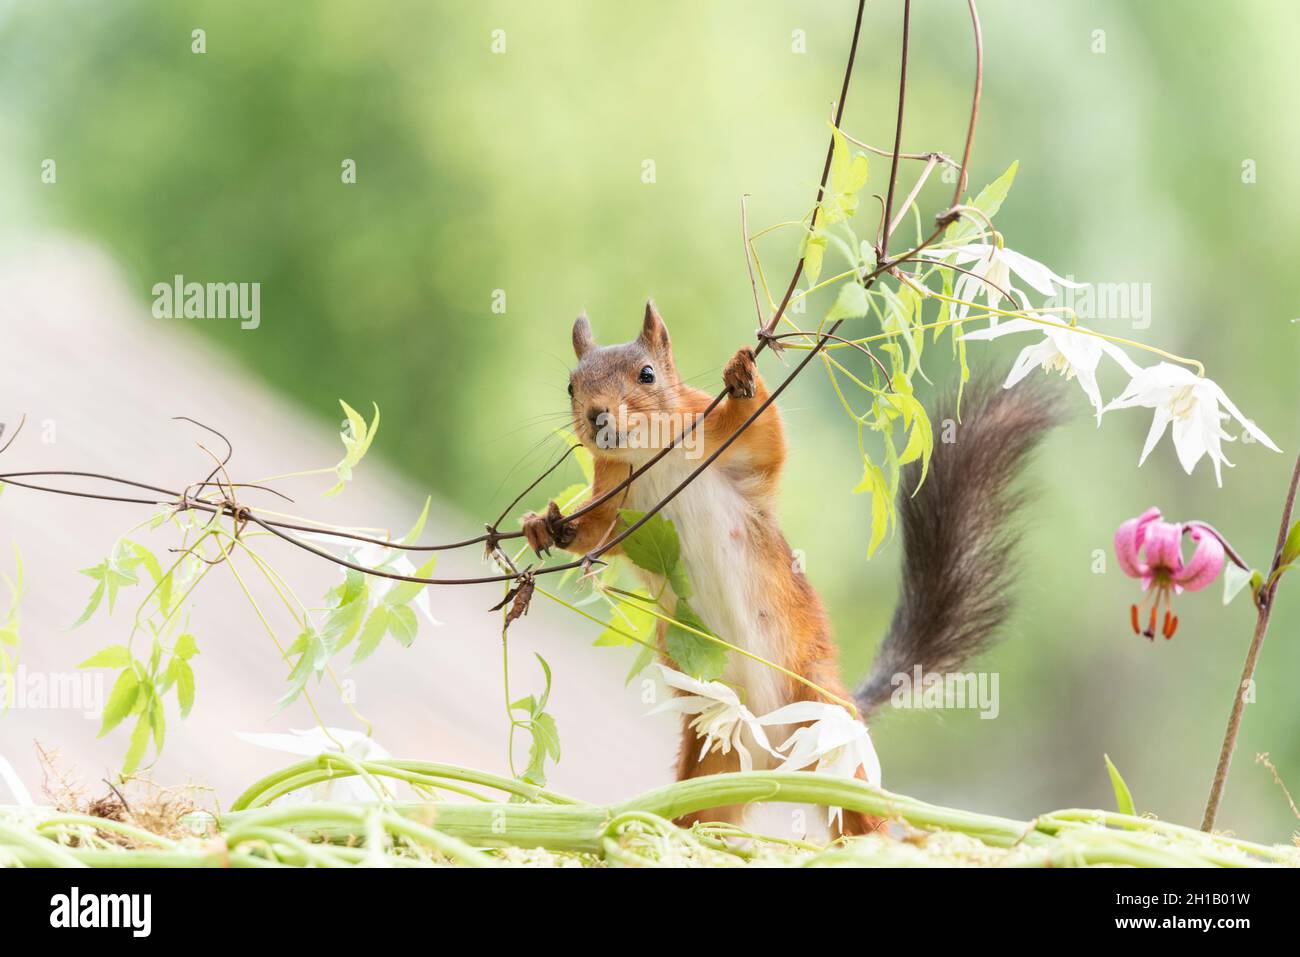 red squirrel is holding a clematis branch Stock Photo